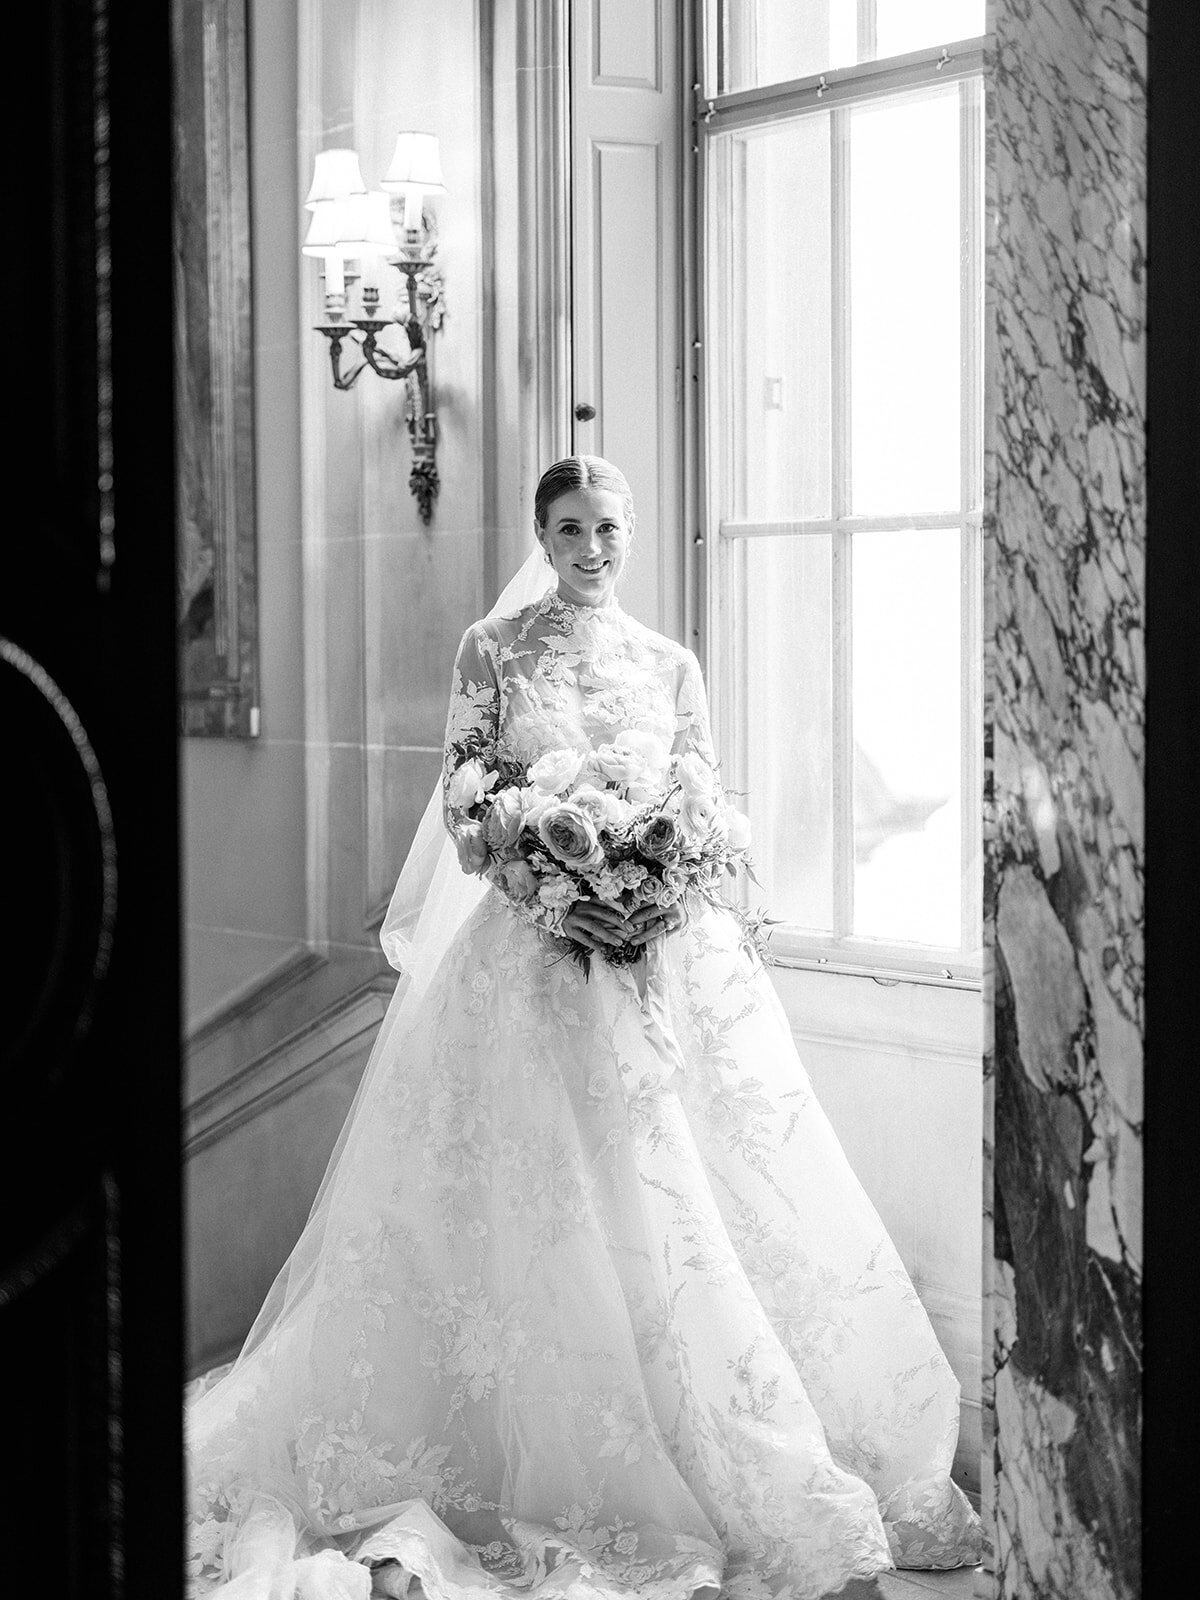 A black and white portrait of a cride through the door at the wedding venue.